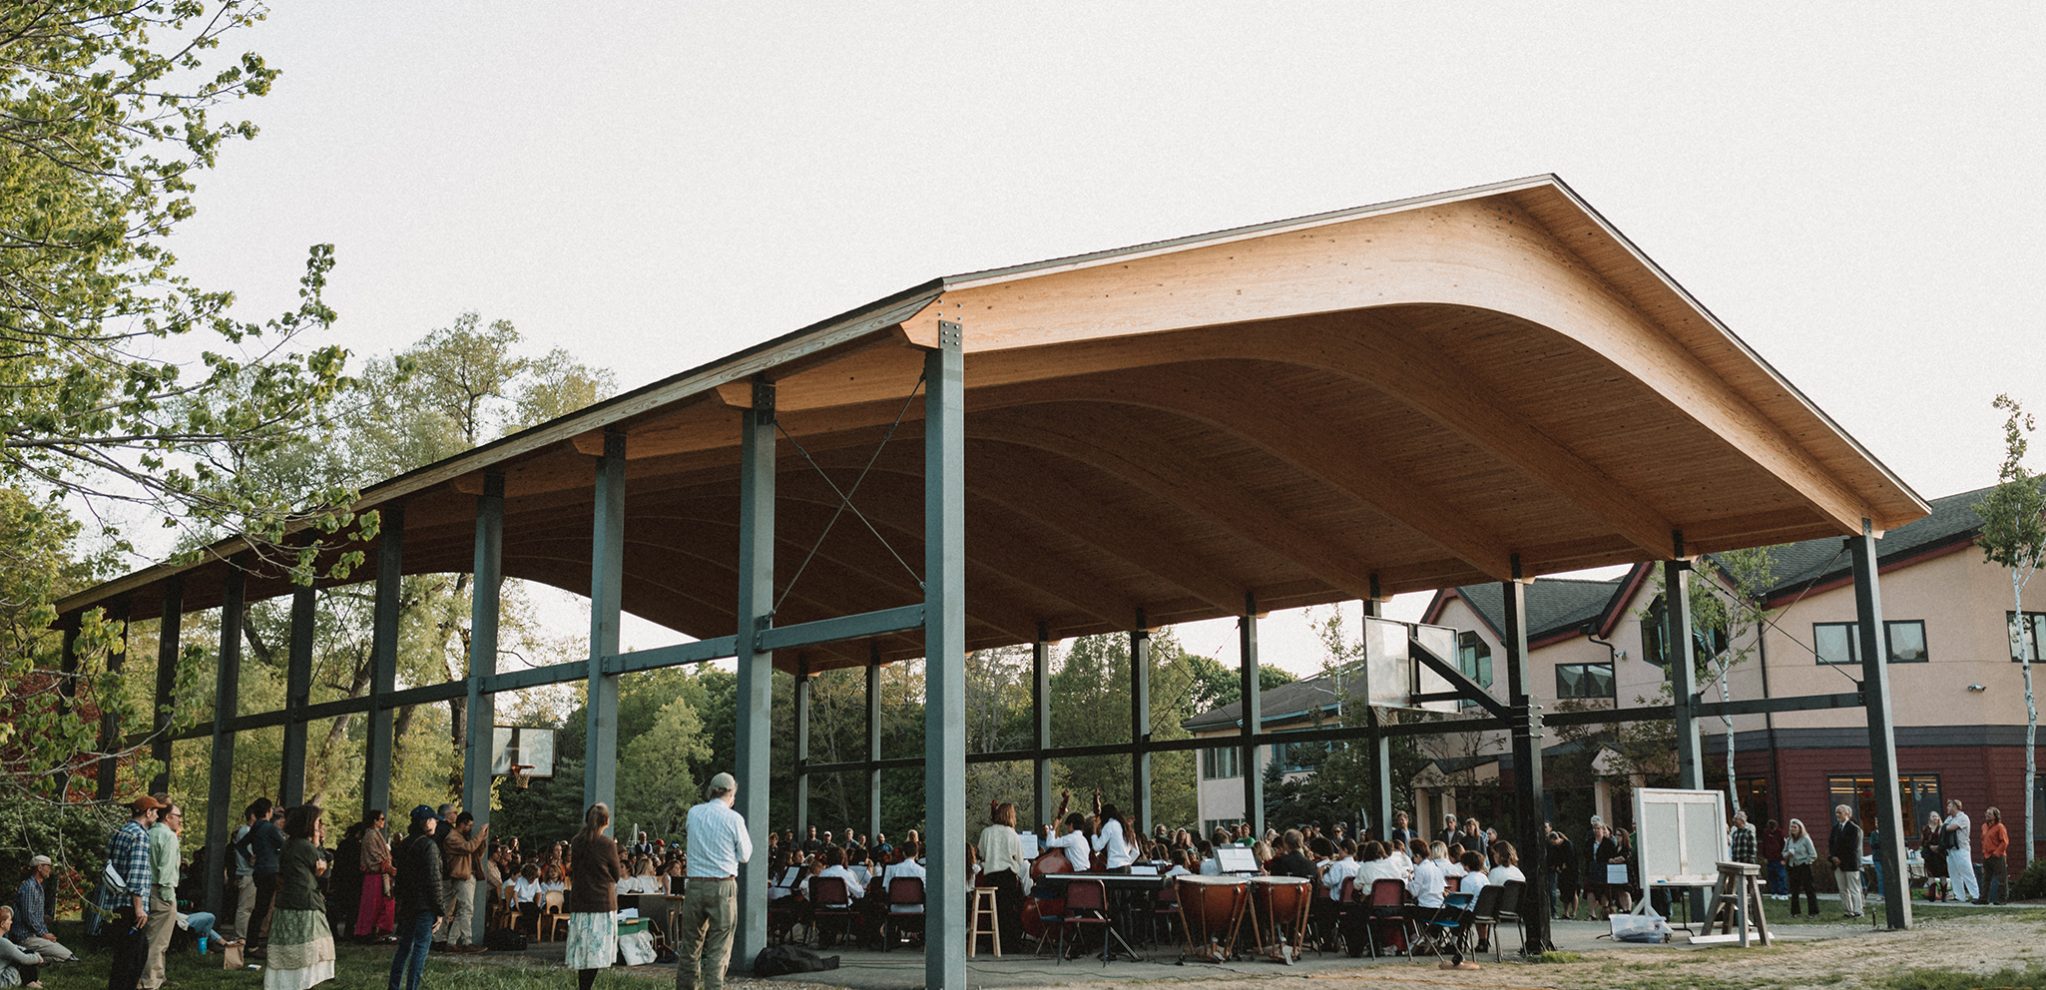 View of school open air pavilion during a concert from an angle. The children are in the distance under the pavilion and the middle school is in the background behind the pavilion.